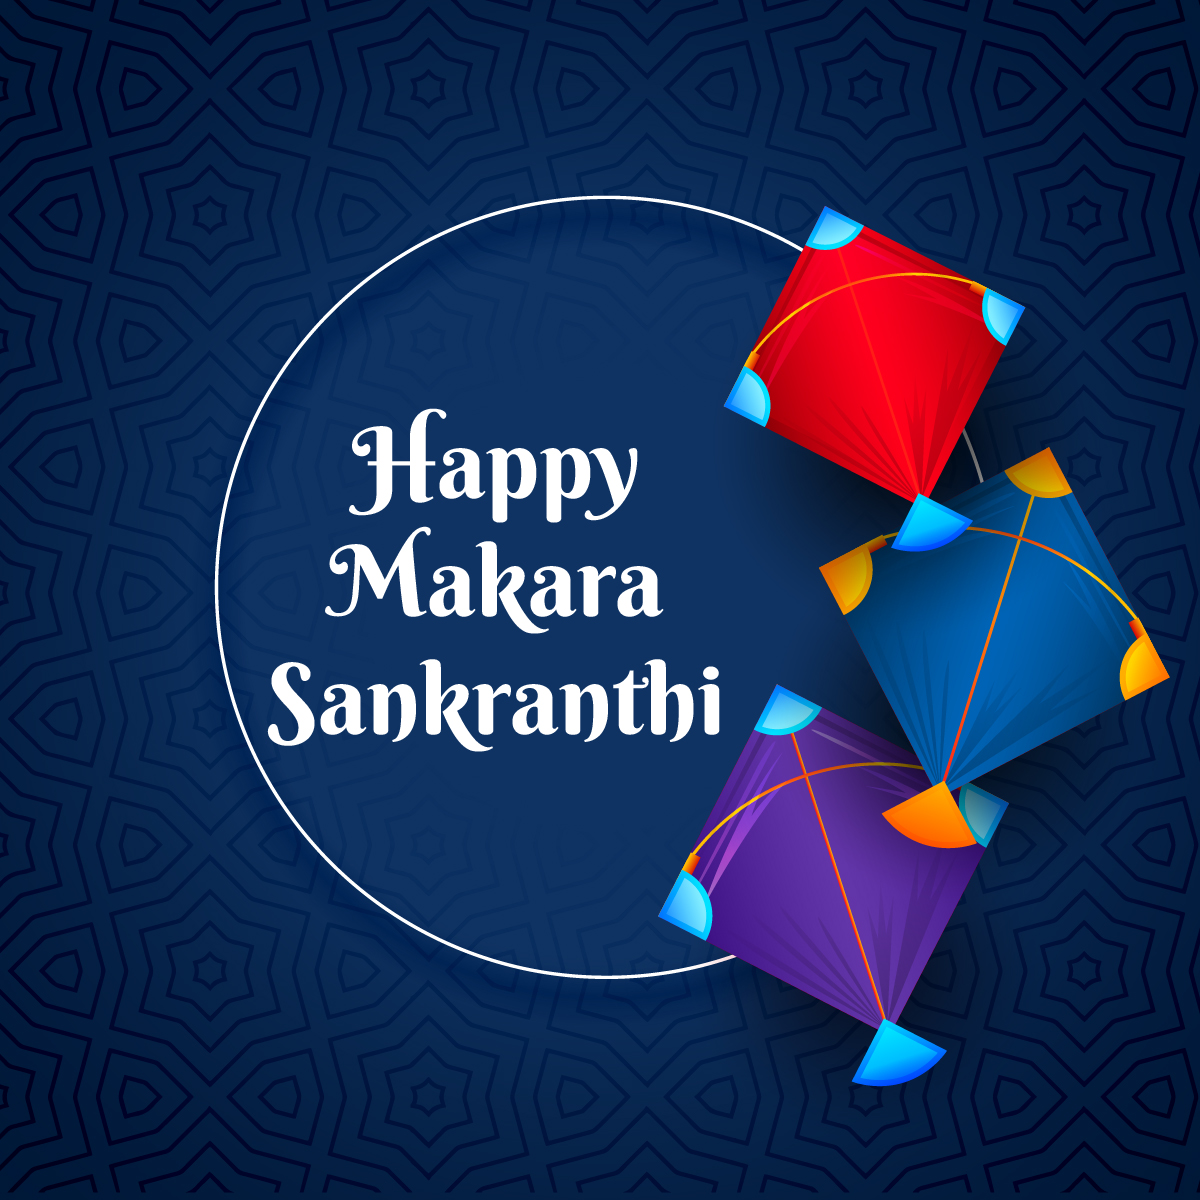 🌞 Wishing you and your loved ones a joyous Makara Sankranti! 🪁 May the sun radiate peace, prosperity, and happiness into your lives. May this festival fill your days with warmth and your heart with sweet moments. Let the kites of success soar high. #HappyMakarSankranti